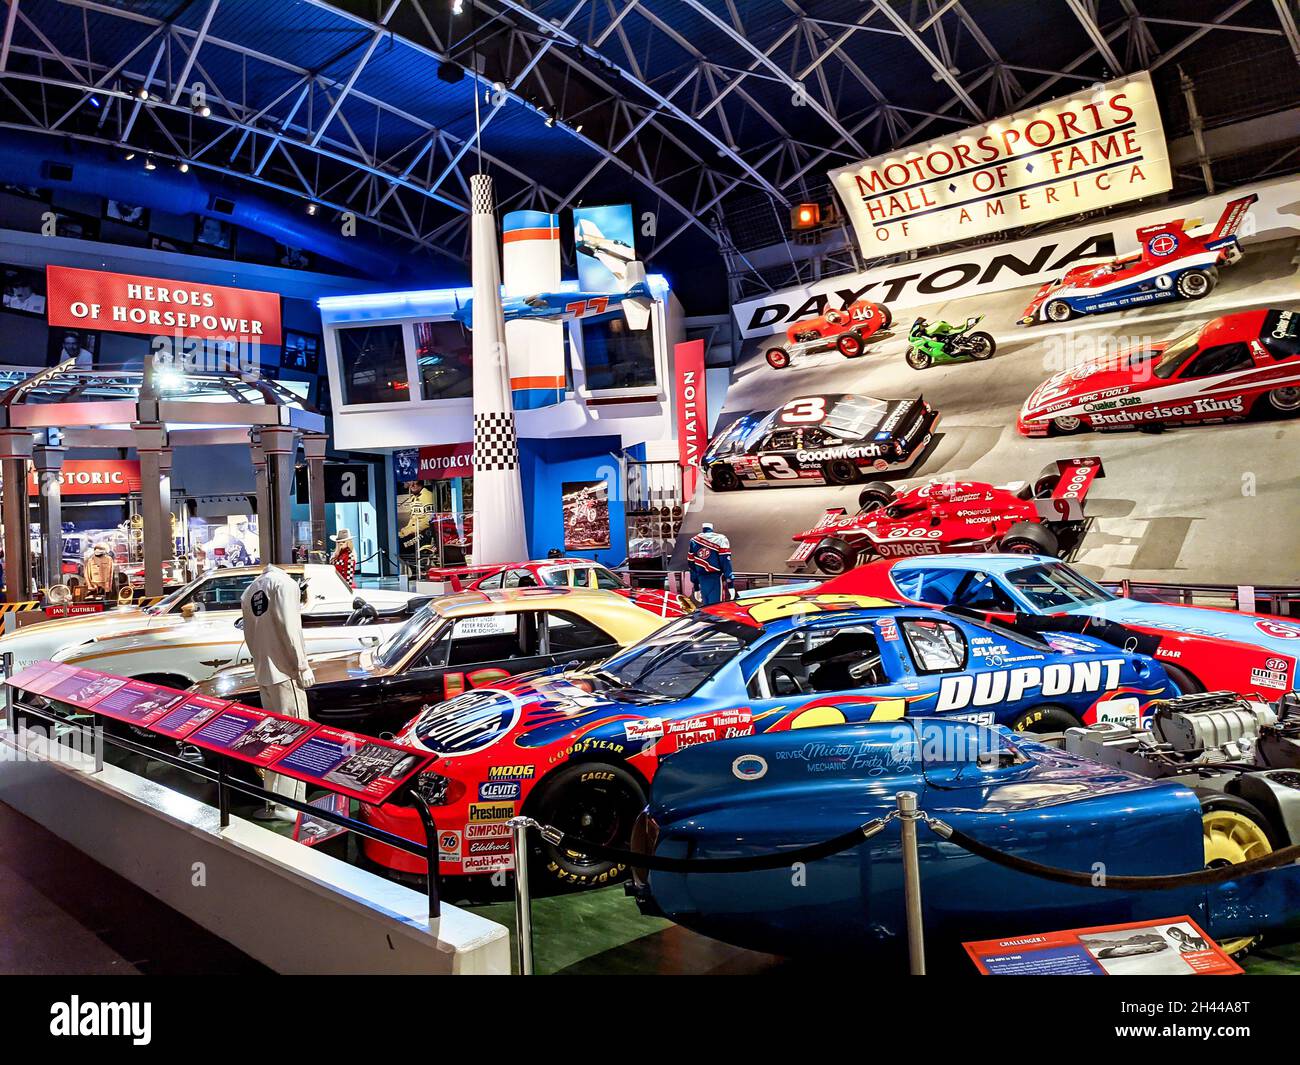 Motorsports Hall of Fame, Daytona Speedway, Florida honors motorsports competitors and contributors from the United States from all disciplines Stock Photo